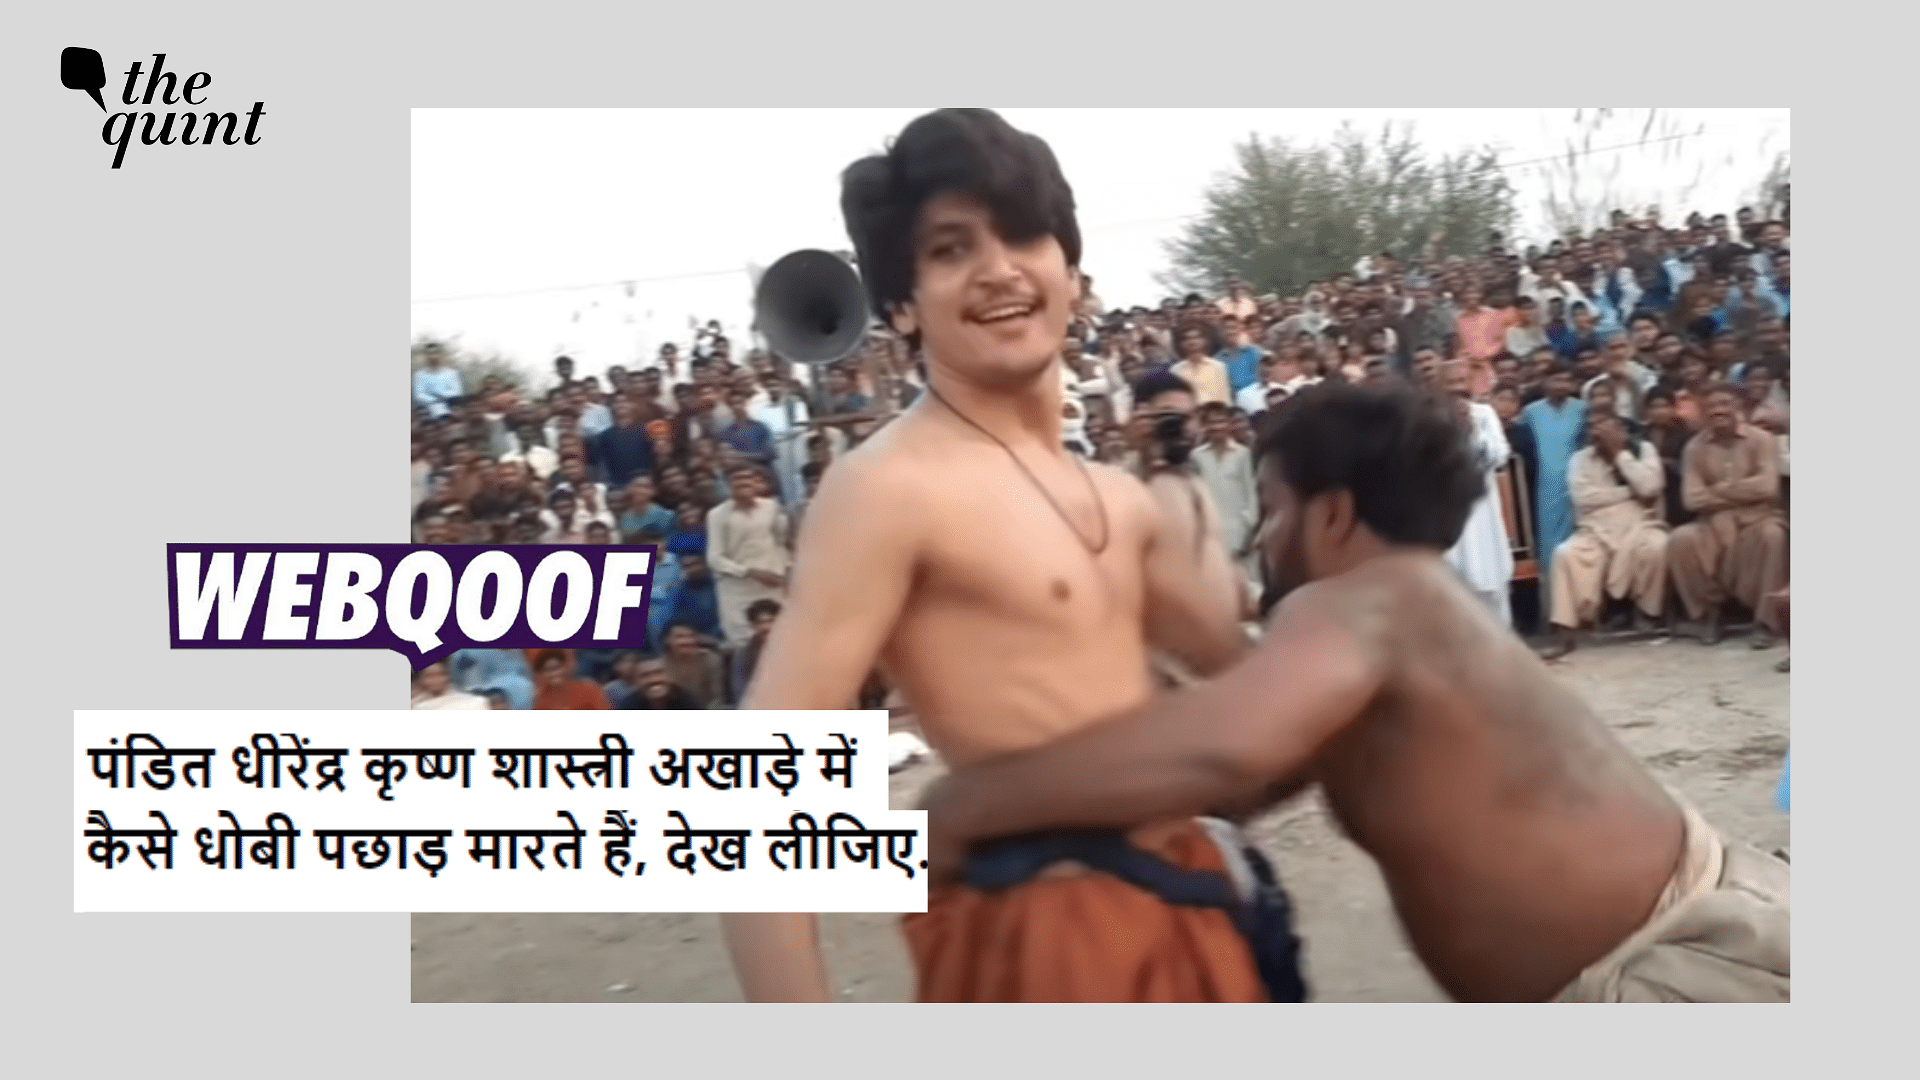 <div class="paragraphs"><p>Fact-Check: The video does not show Dhirendra Shastri wrestling.</p></div>